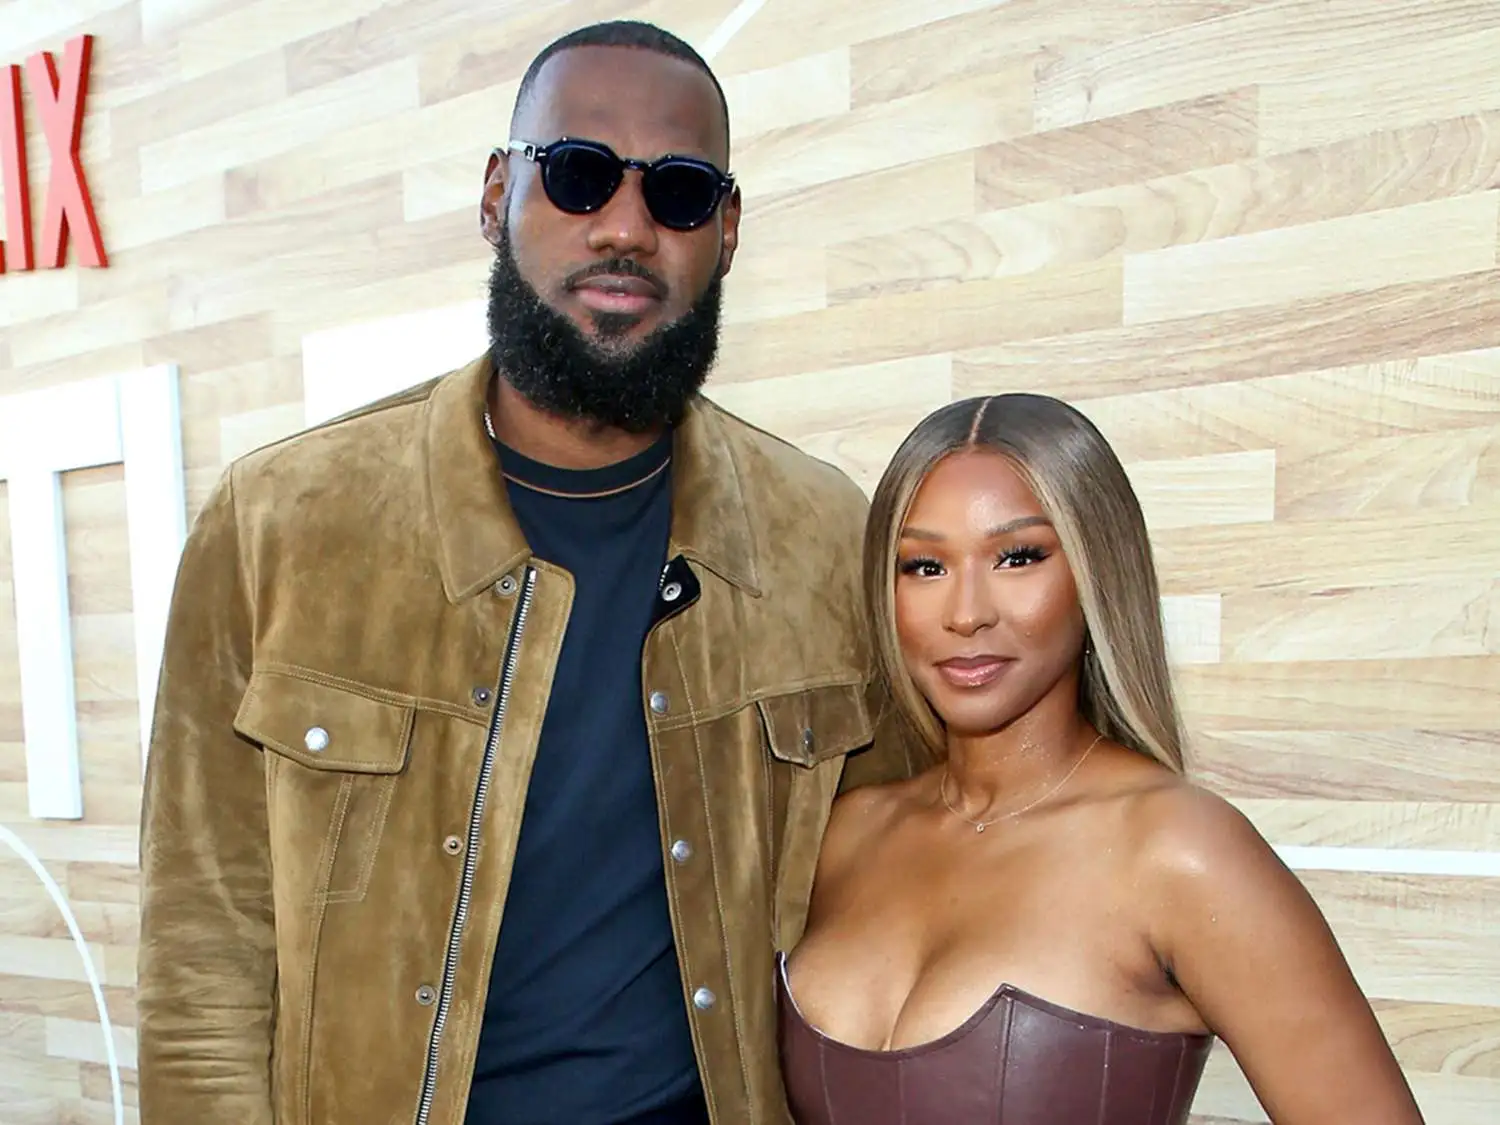 LeBron James offers candid post-NBA game moment with wife Savannah: “Rub my feet please”